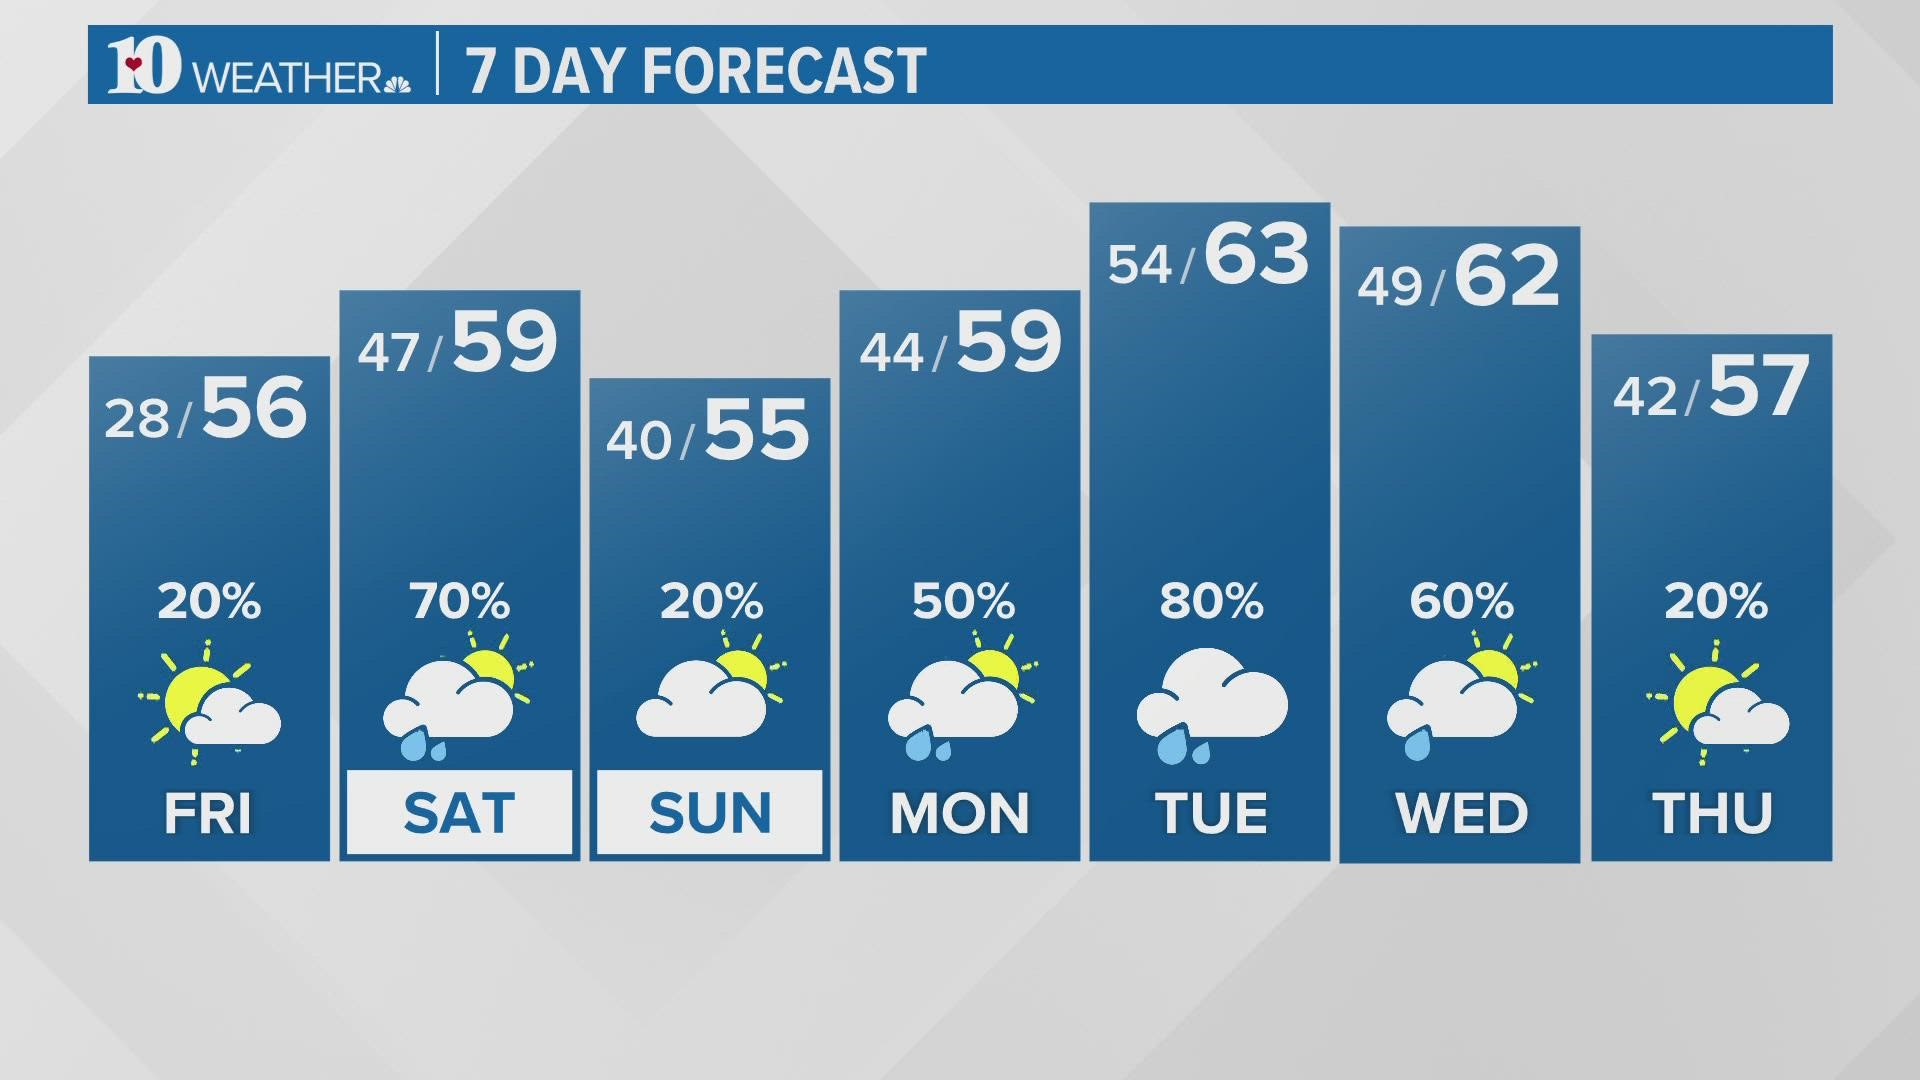 Temps will climb back to the seasonal average through the weekend and next week, but heavy rain looking likely.